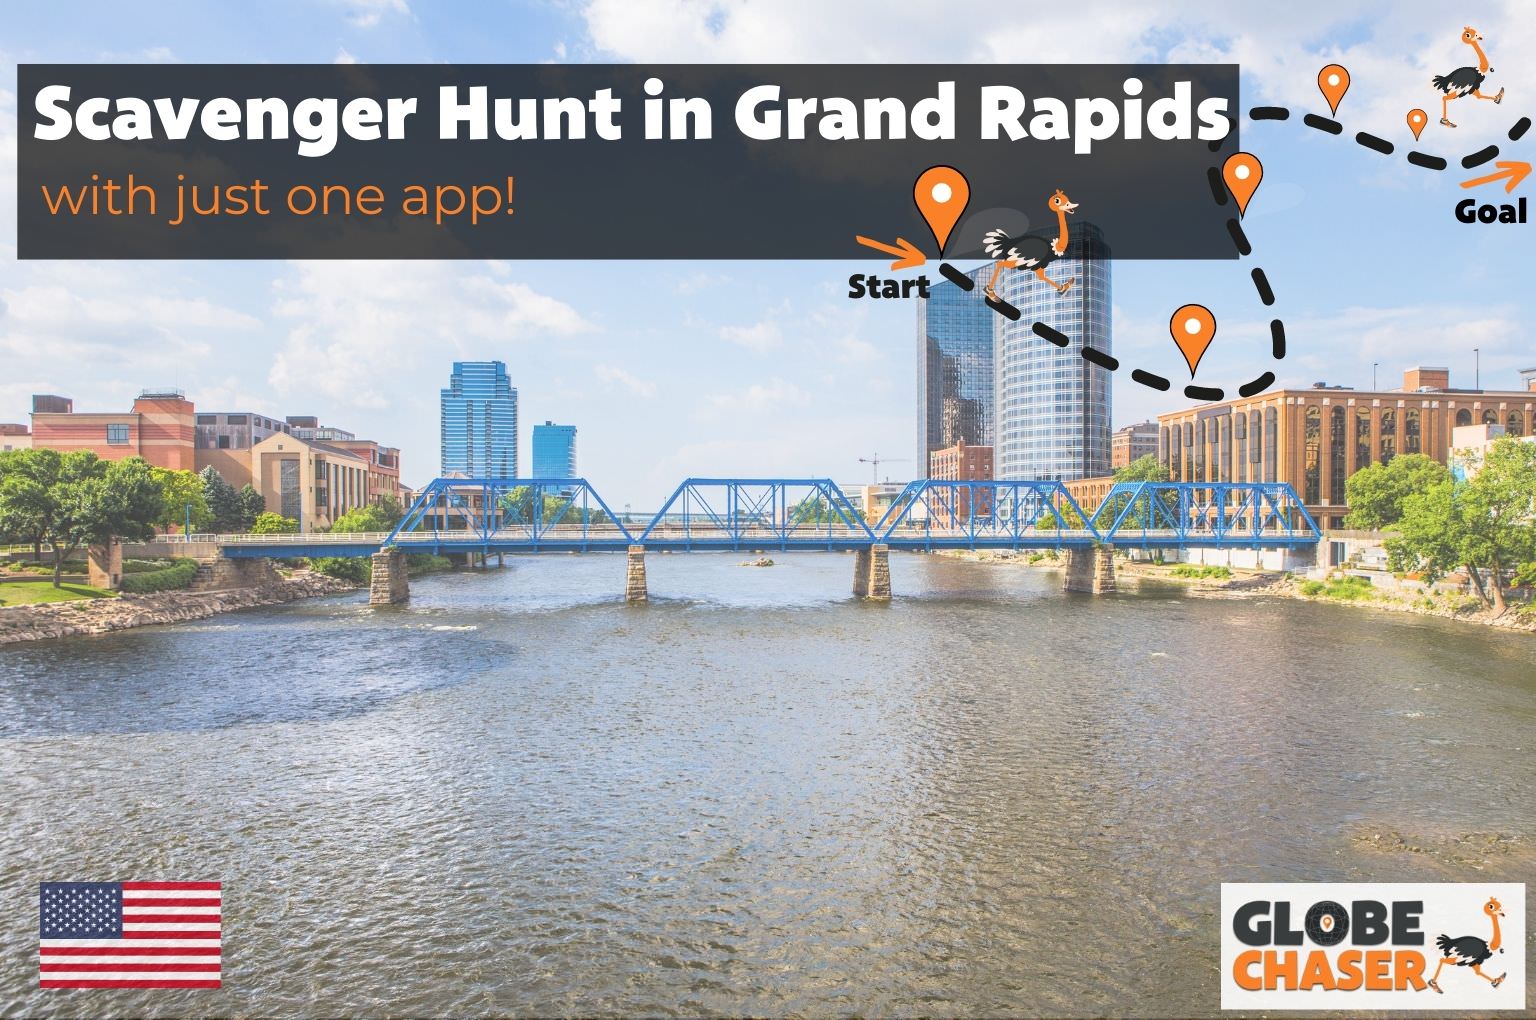 Scavenger Hunt in Grand Rapids, USA - Family Activities with the Globe Chaser App for Outdoor Fun